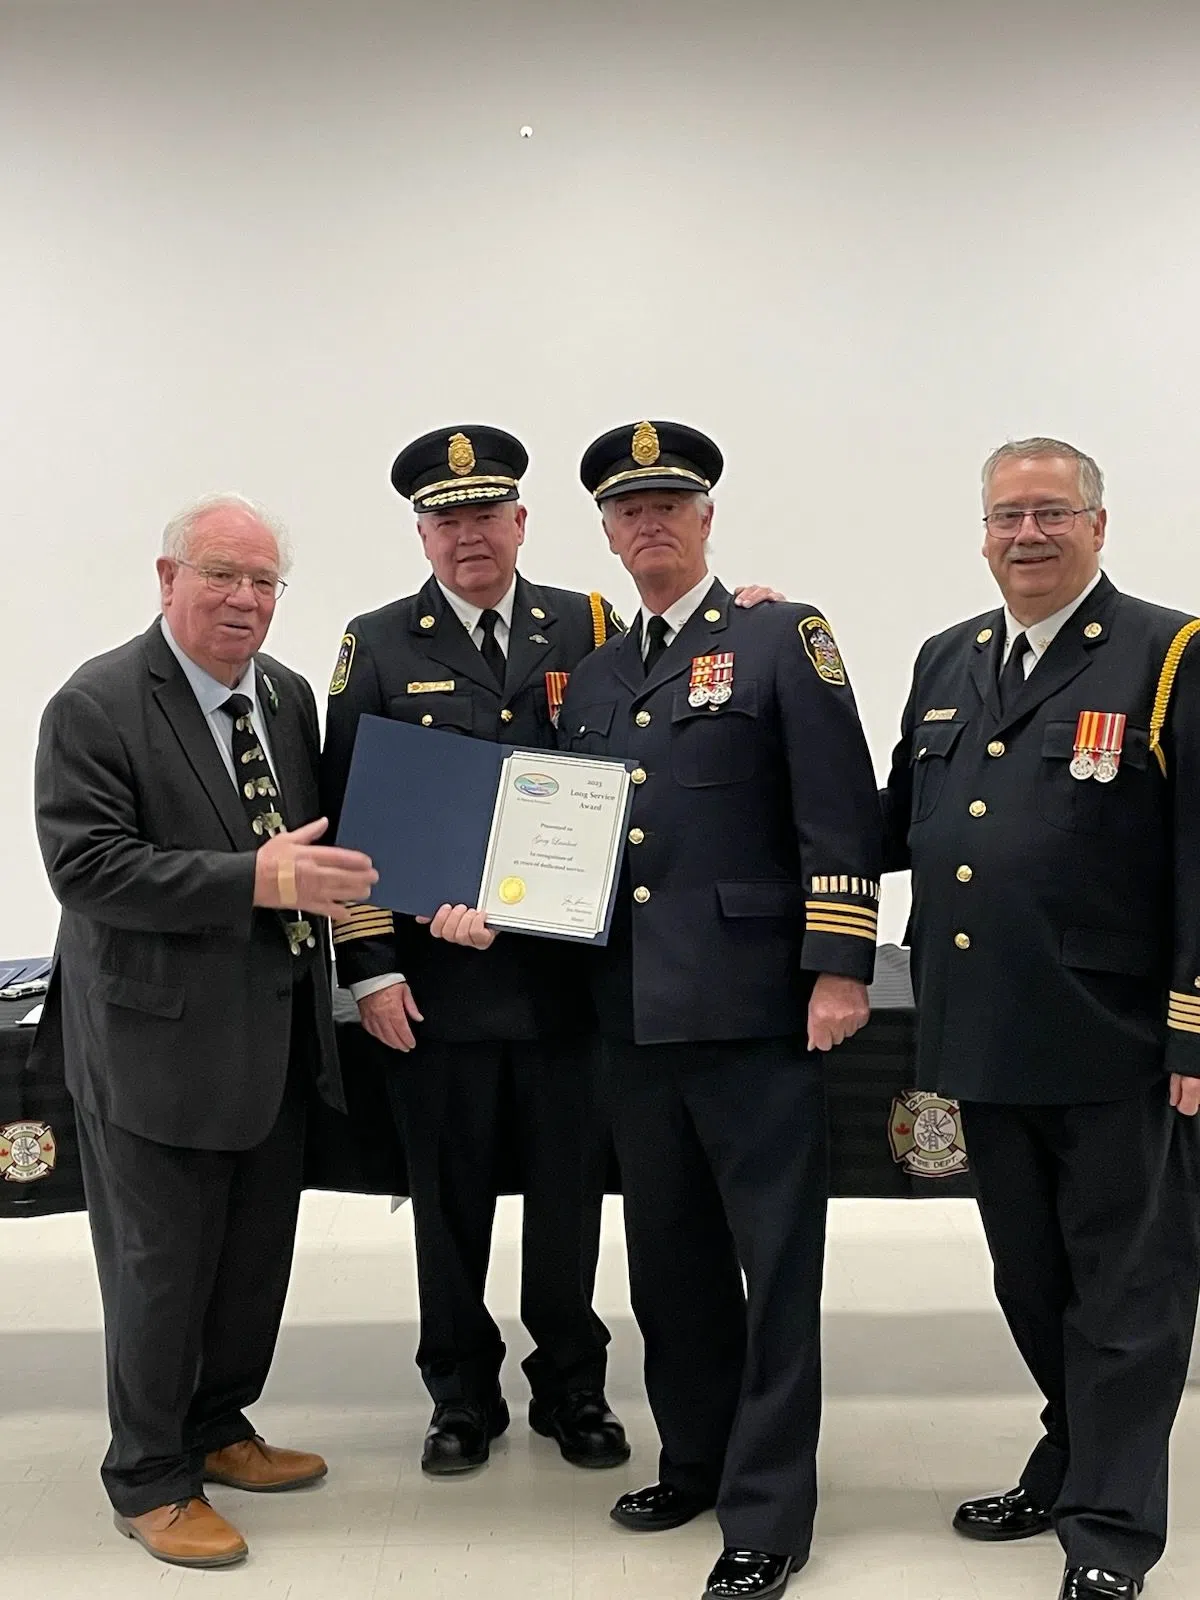 Firefighters honoured at award luncheon